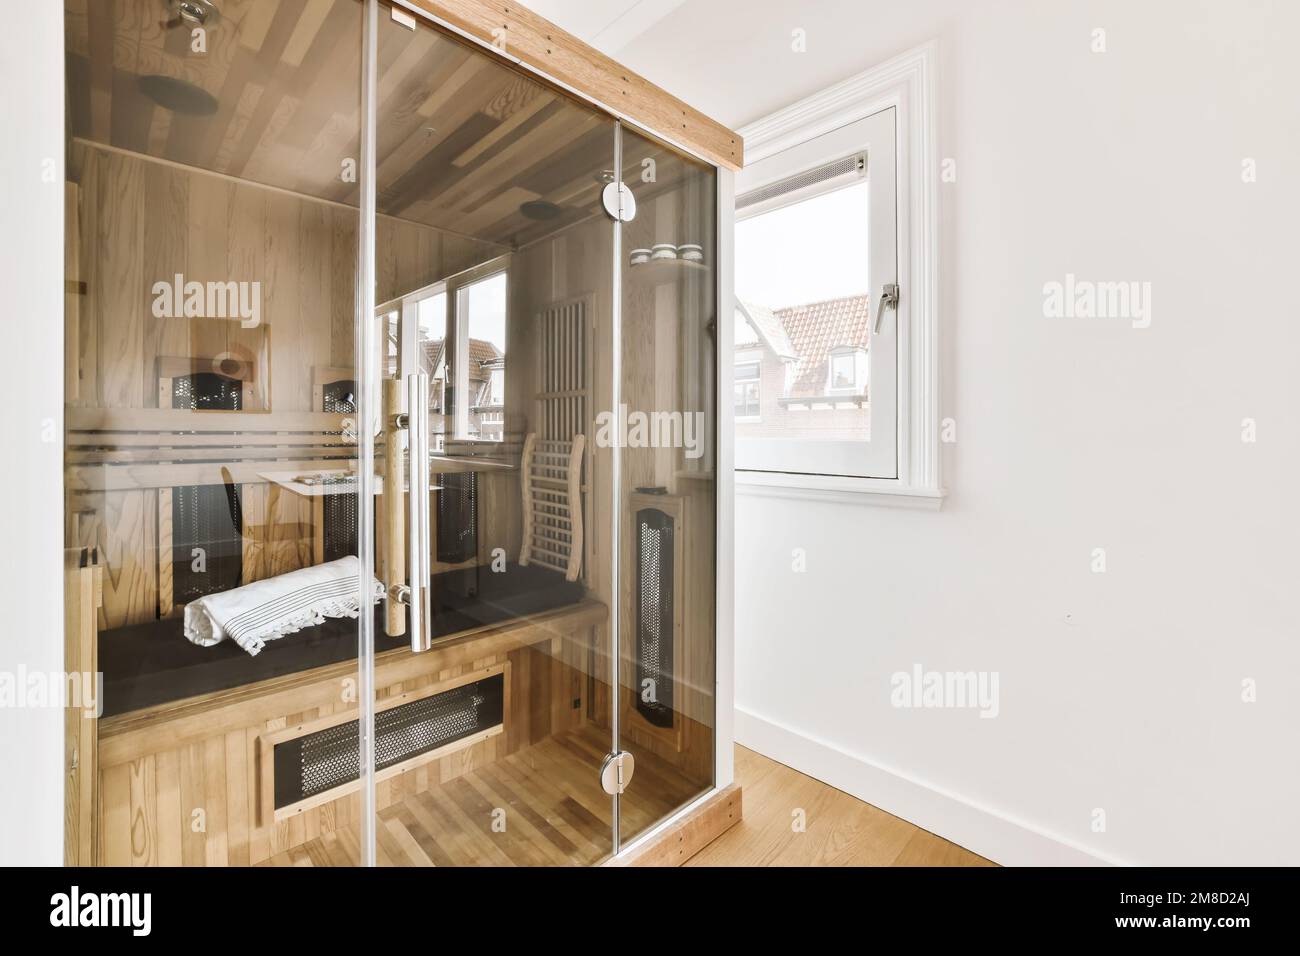 a bathroom with wooden floors and white walls, there is a glass shower stall in the corner to the right Stock Photo